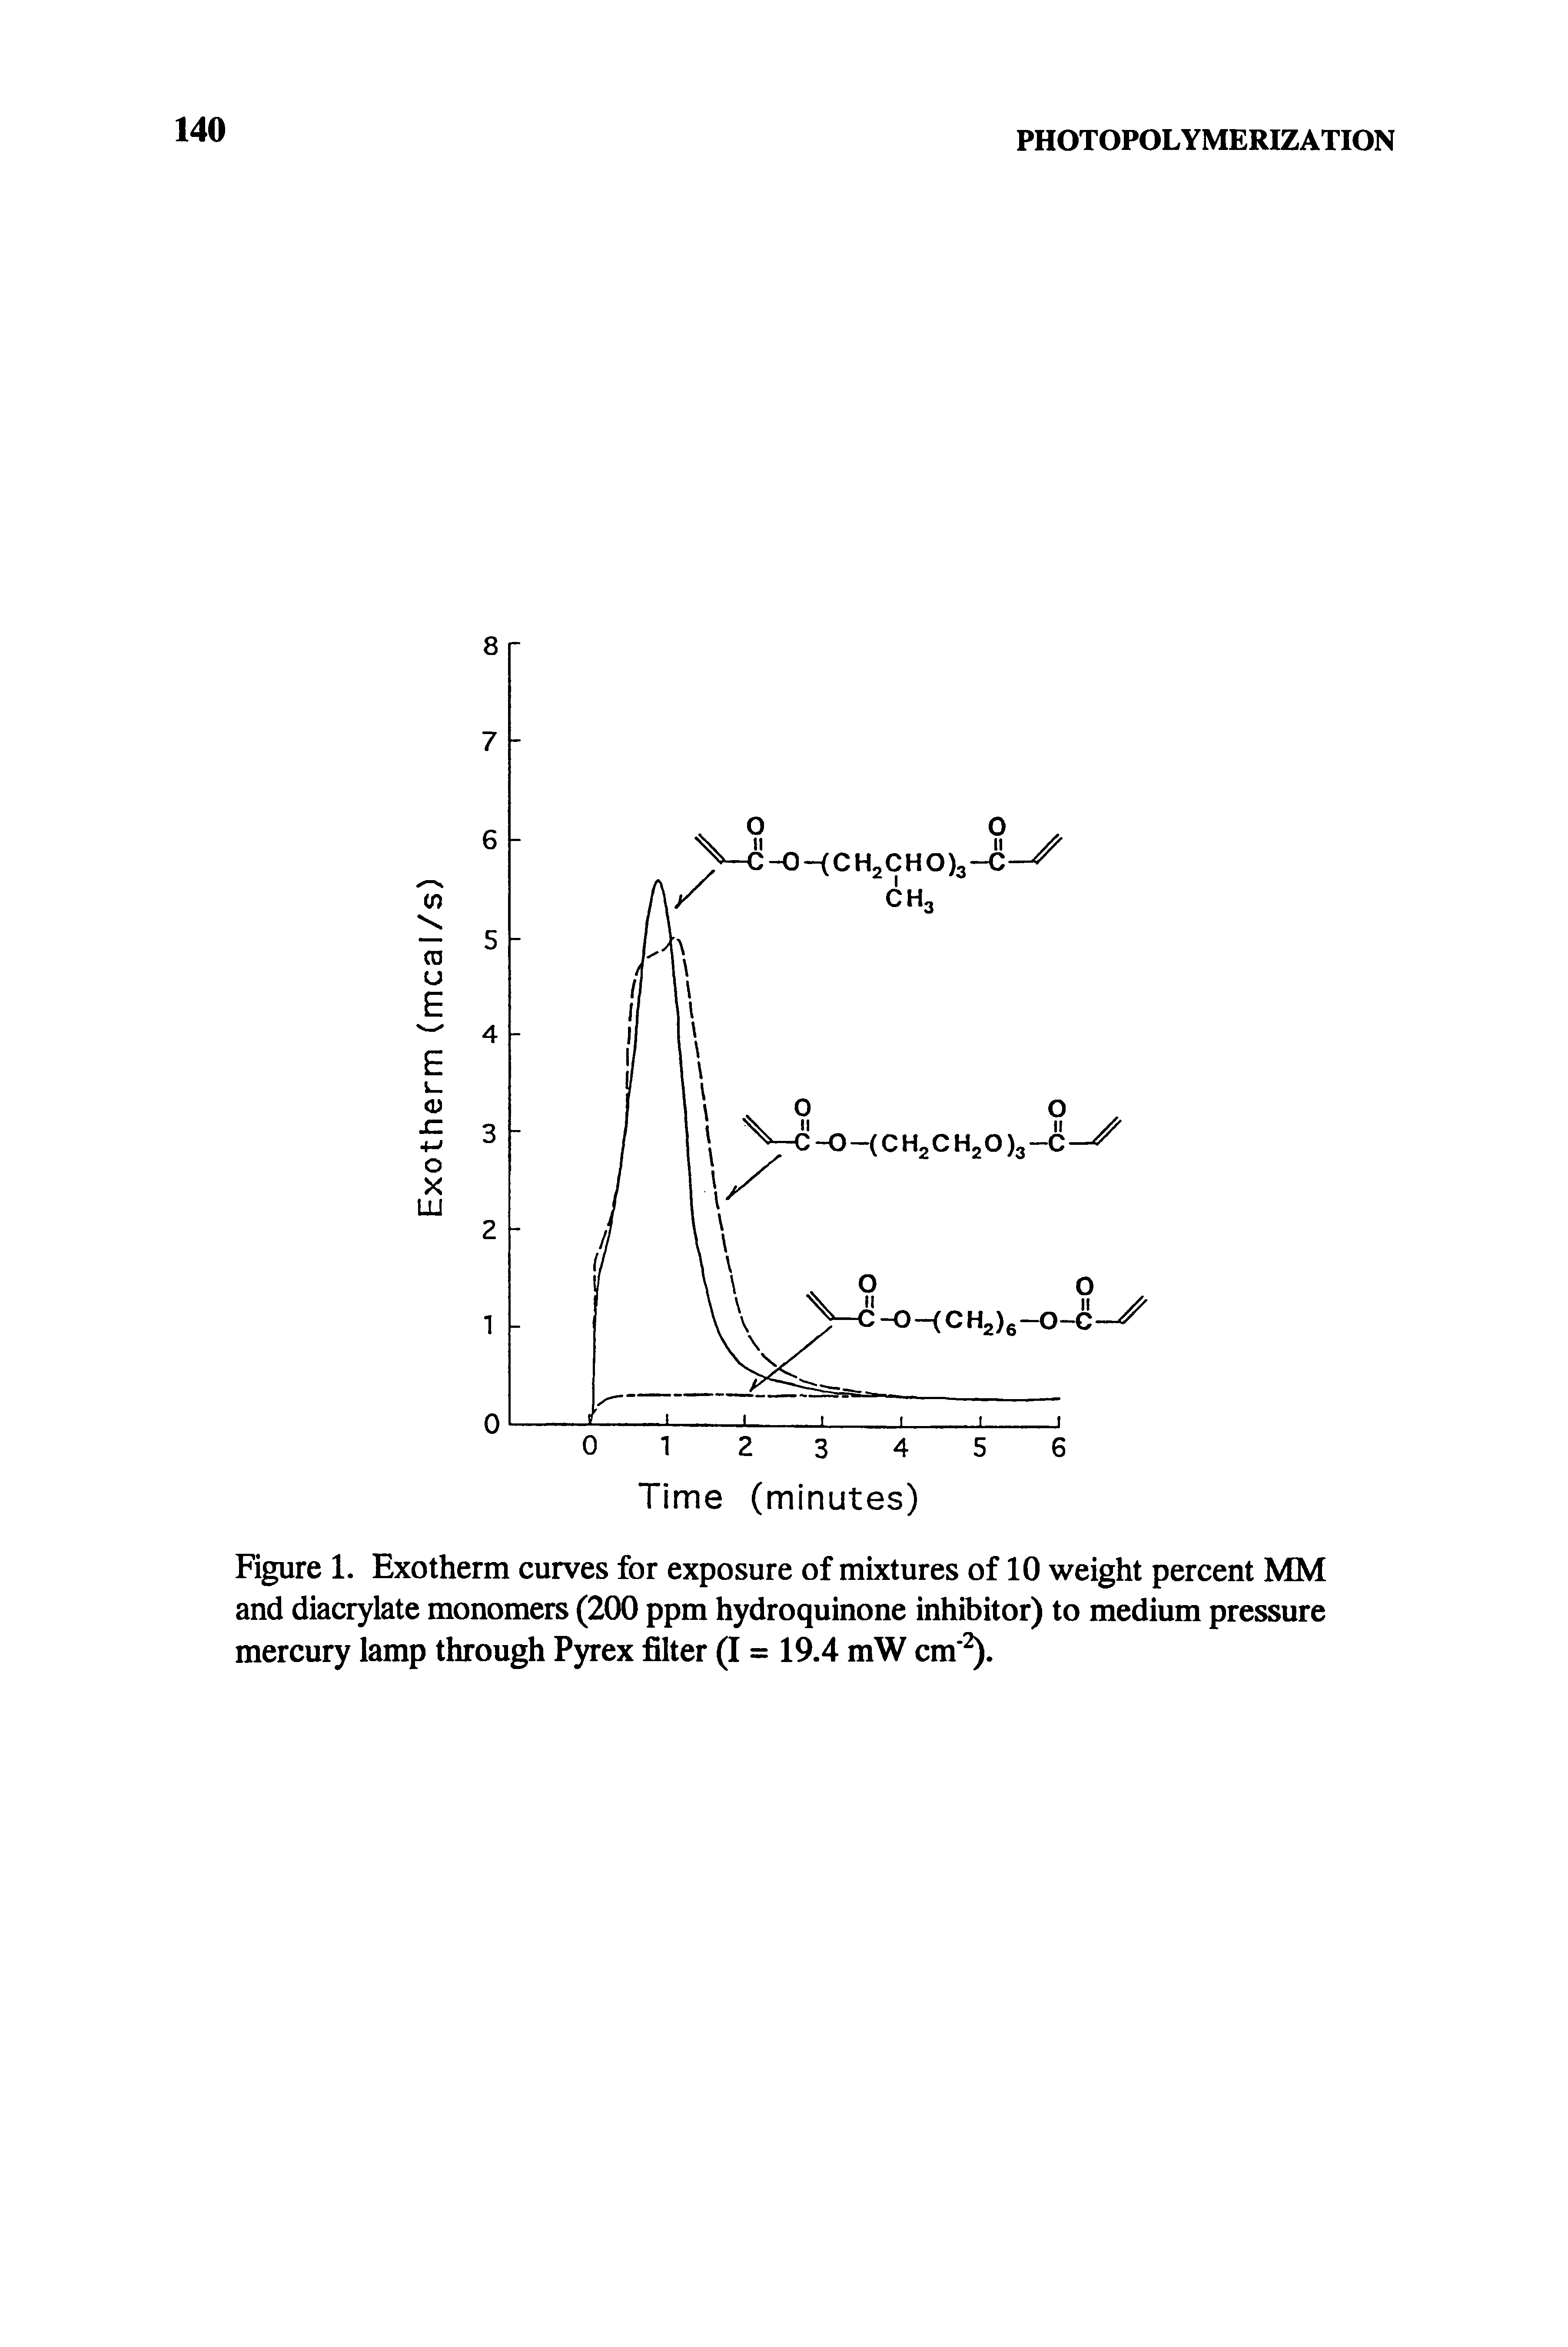 Figure 1. Exotherm curves for exposure of mixtures of 10 weight percent MM and diacrylate monomers (200 ppm hydroquinone inhibitor) to medium pressure mercury lamp through Pyrex filter (I = 19.4 mW cm 2).